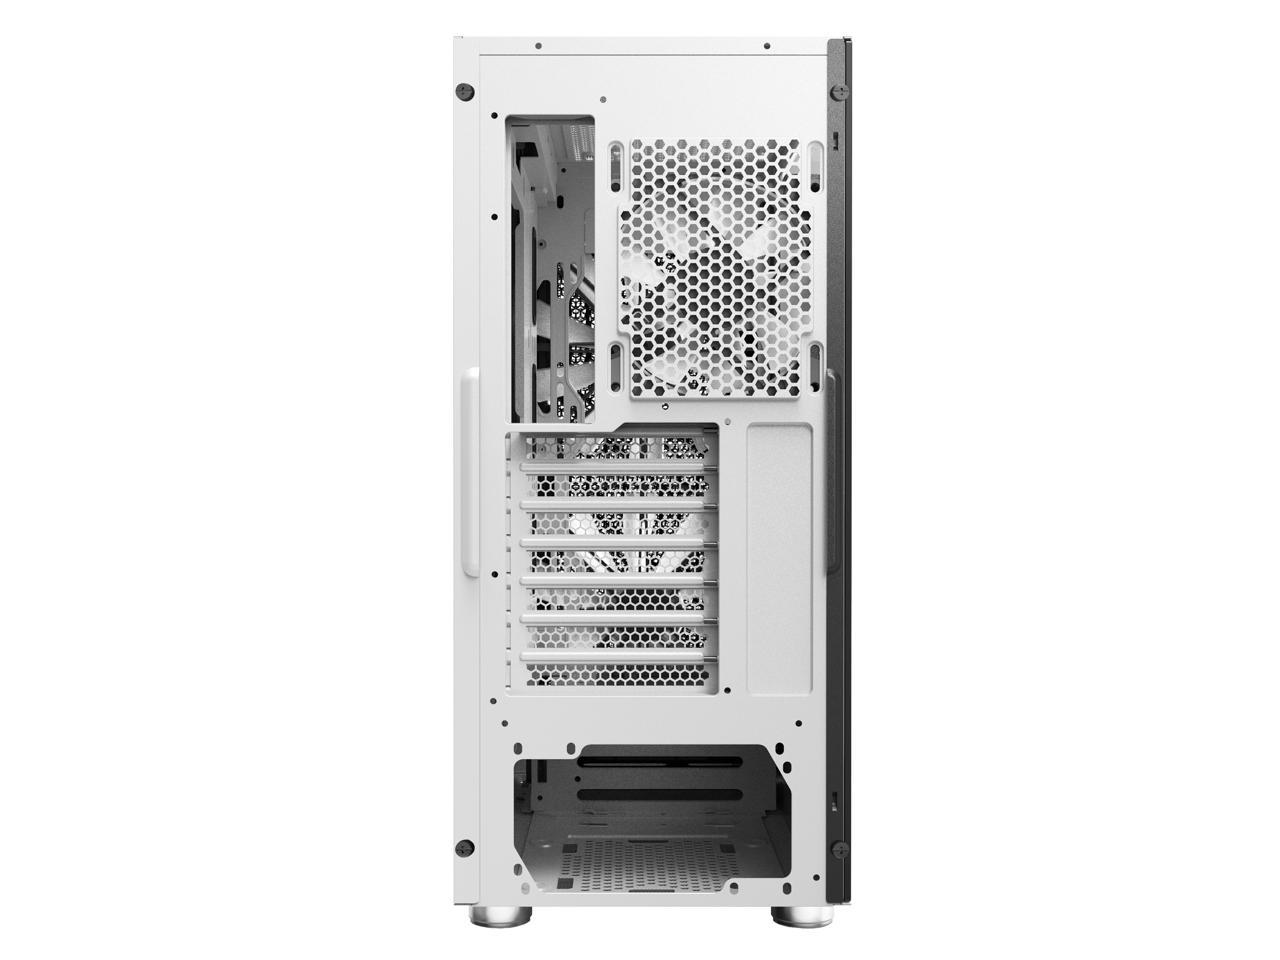 Montech Air X ARGB Pull Out Glass/ Metallic Diamond Mesh Front Panel/ 200 mm ARGB Fans2 & 120mm ARGB Fan1 Pre-Installed Black ATX Mid-Tower Case/ Super High Airflow/ Tempered Glass Side Panel 